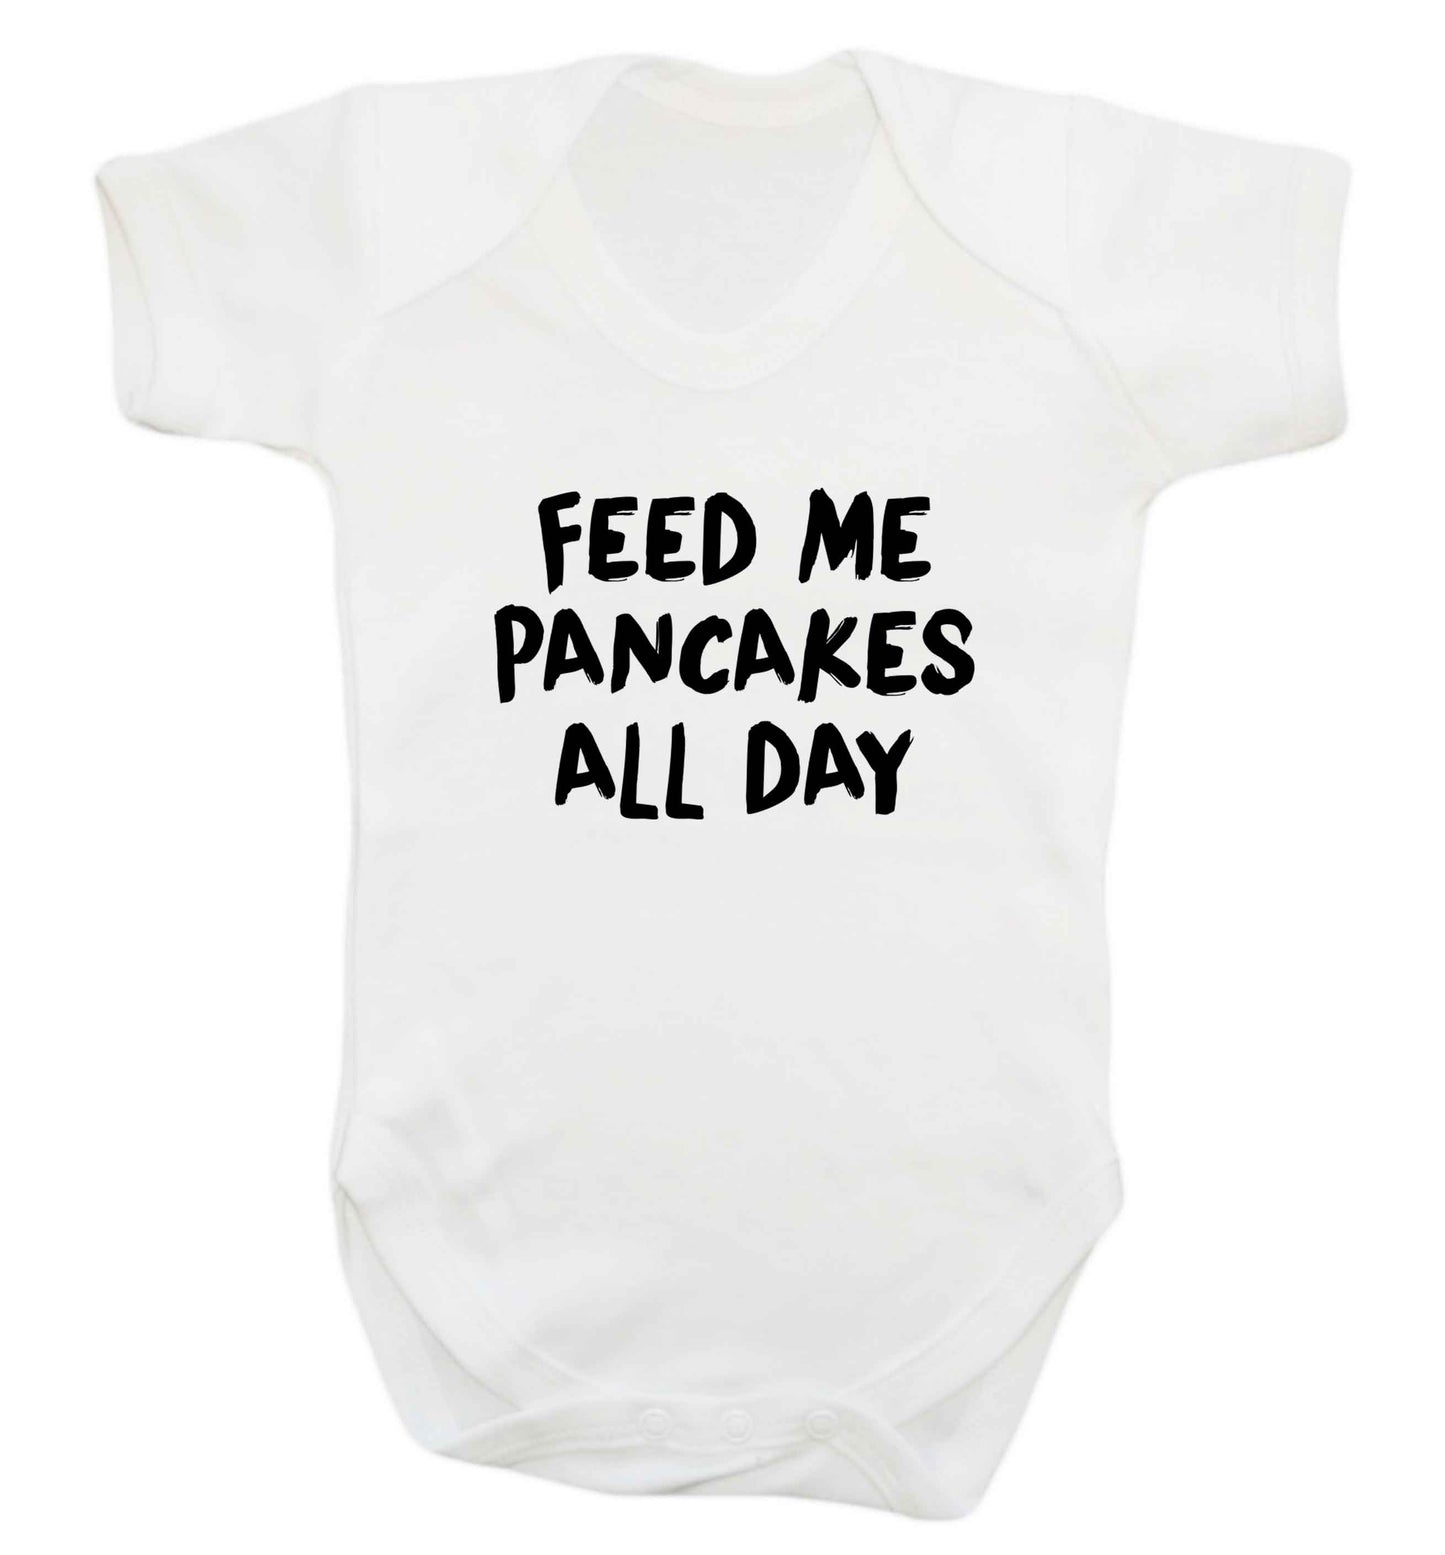 Feed me pancakes all day baby vest white 18-24 months